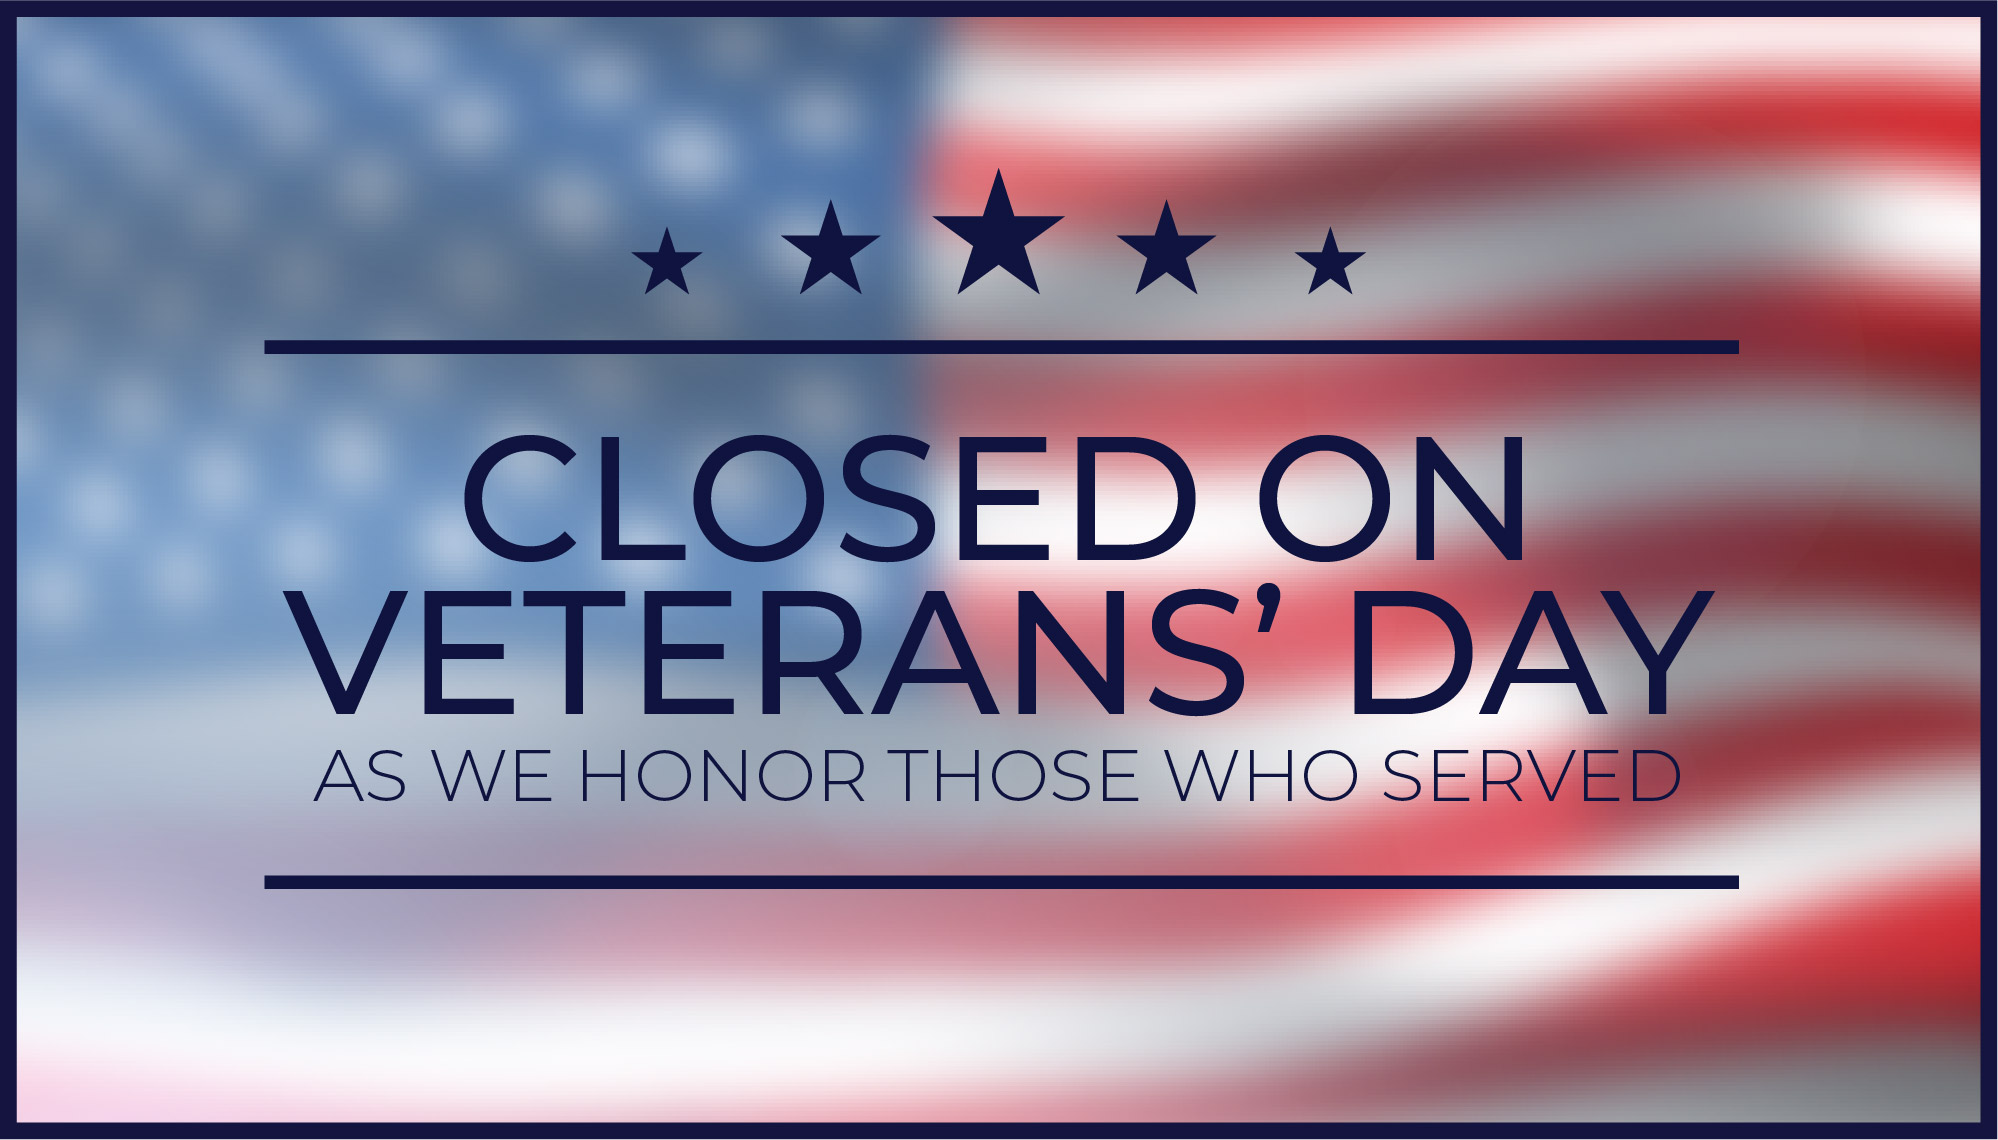 CLOSED on Veterans' Day